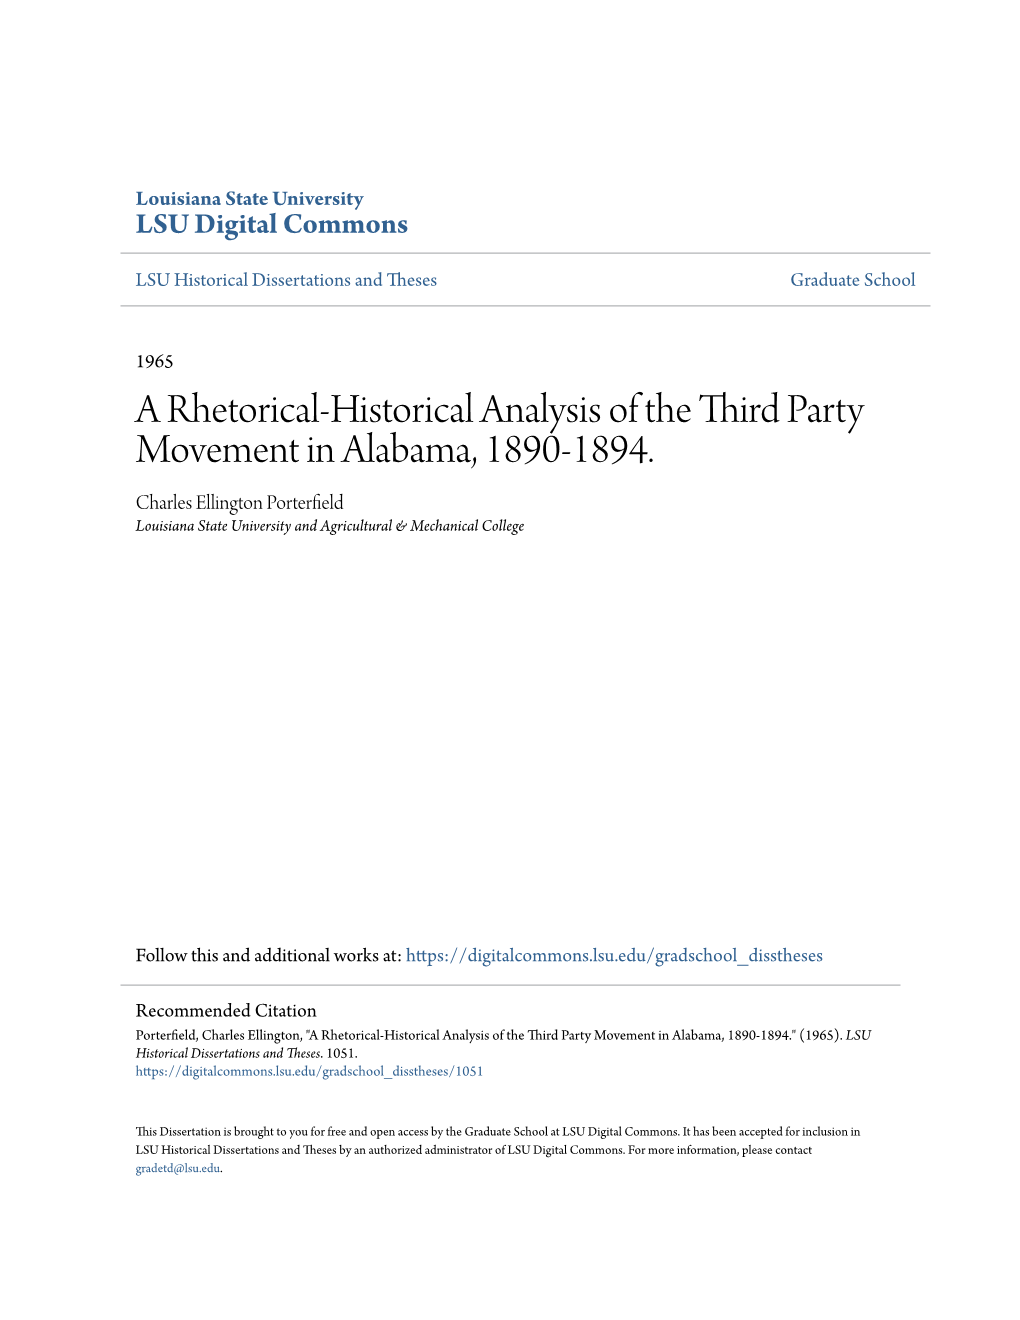 A Rhetorical-Historical Analysis of the Third Party Movement in Alabama, 1890-1894